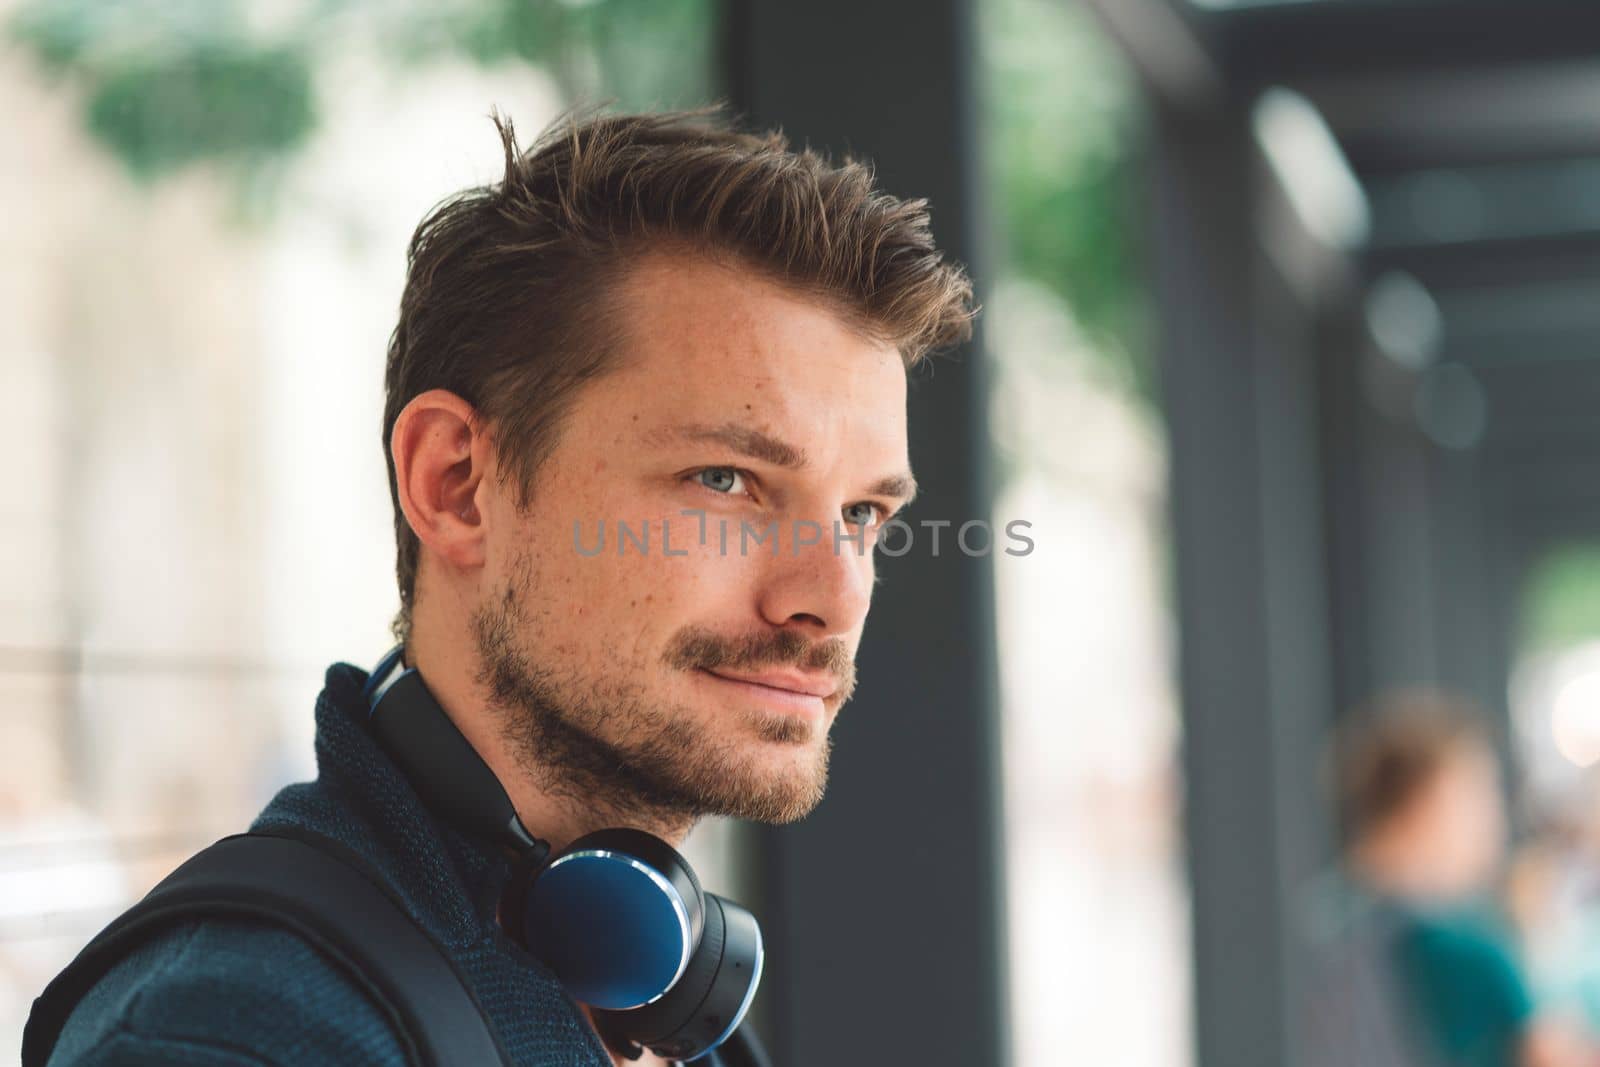 Beautiful caucasian man living in the city. Man spending his day in the city, sun is shining, weather is nice. Young millennial person living in the city, doing his daily errands always using his digital devices, tablet or phone.